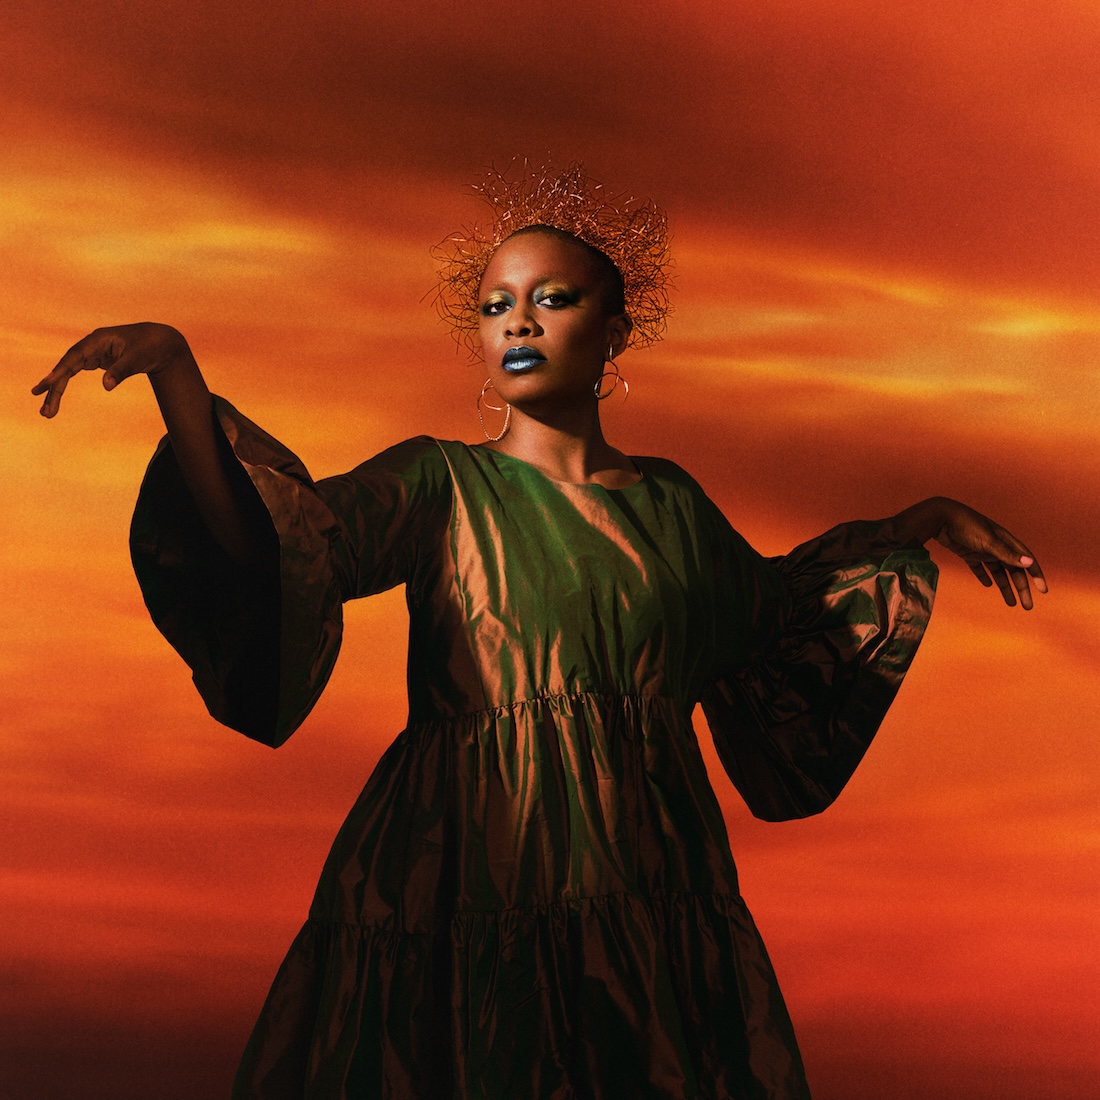 A Black woman stands in front of a fiery orange background, wearing a wiry headdress and a metallic bronze gown, her arms partially outstretched.